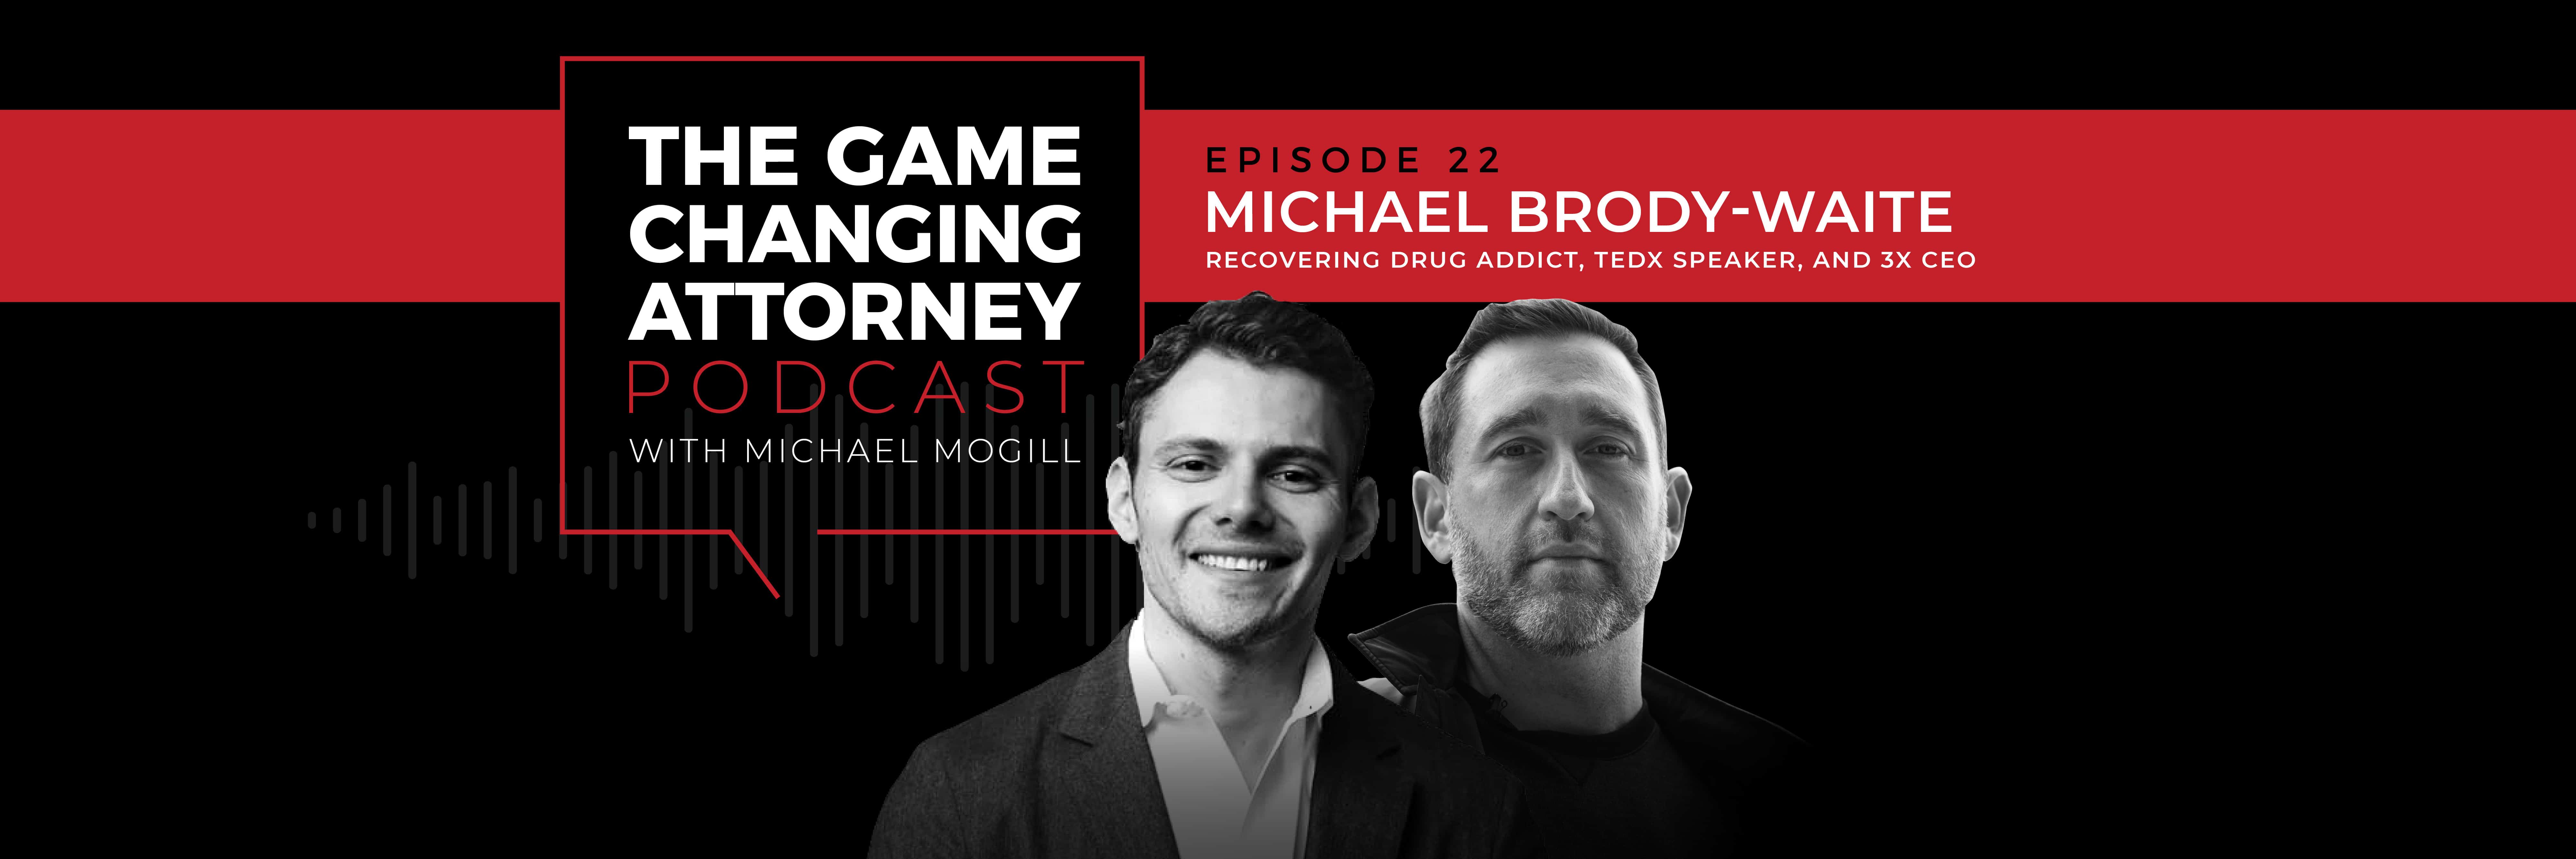 Michael Brody-Waite - The Game Changing Attorney Podcast - Desktop